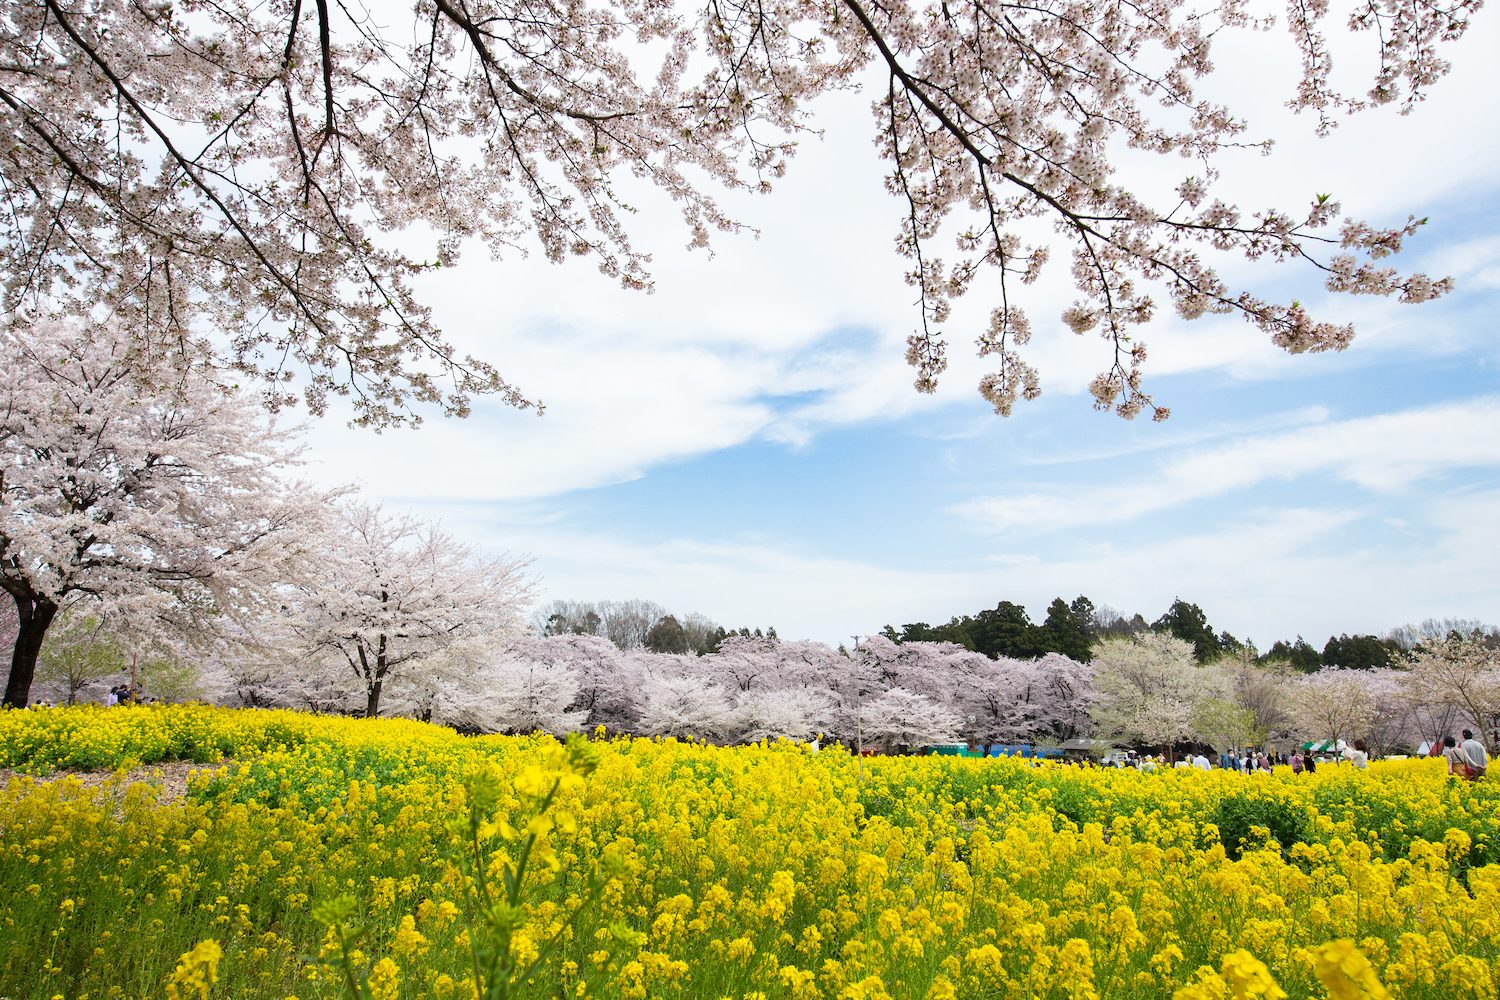 A landscape of pink cherry blossoms and yellow canola flowers